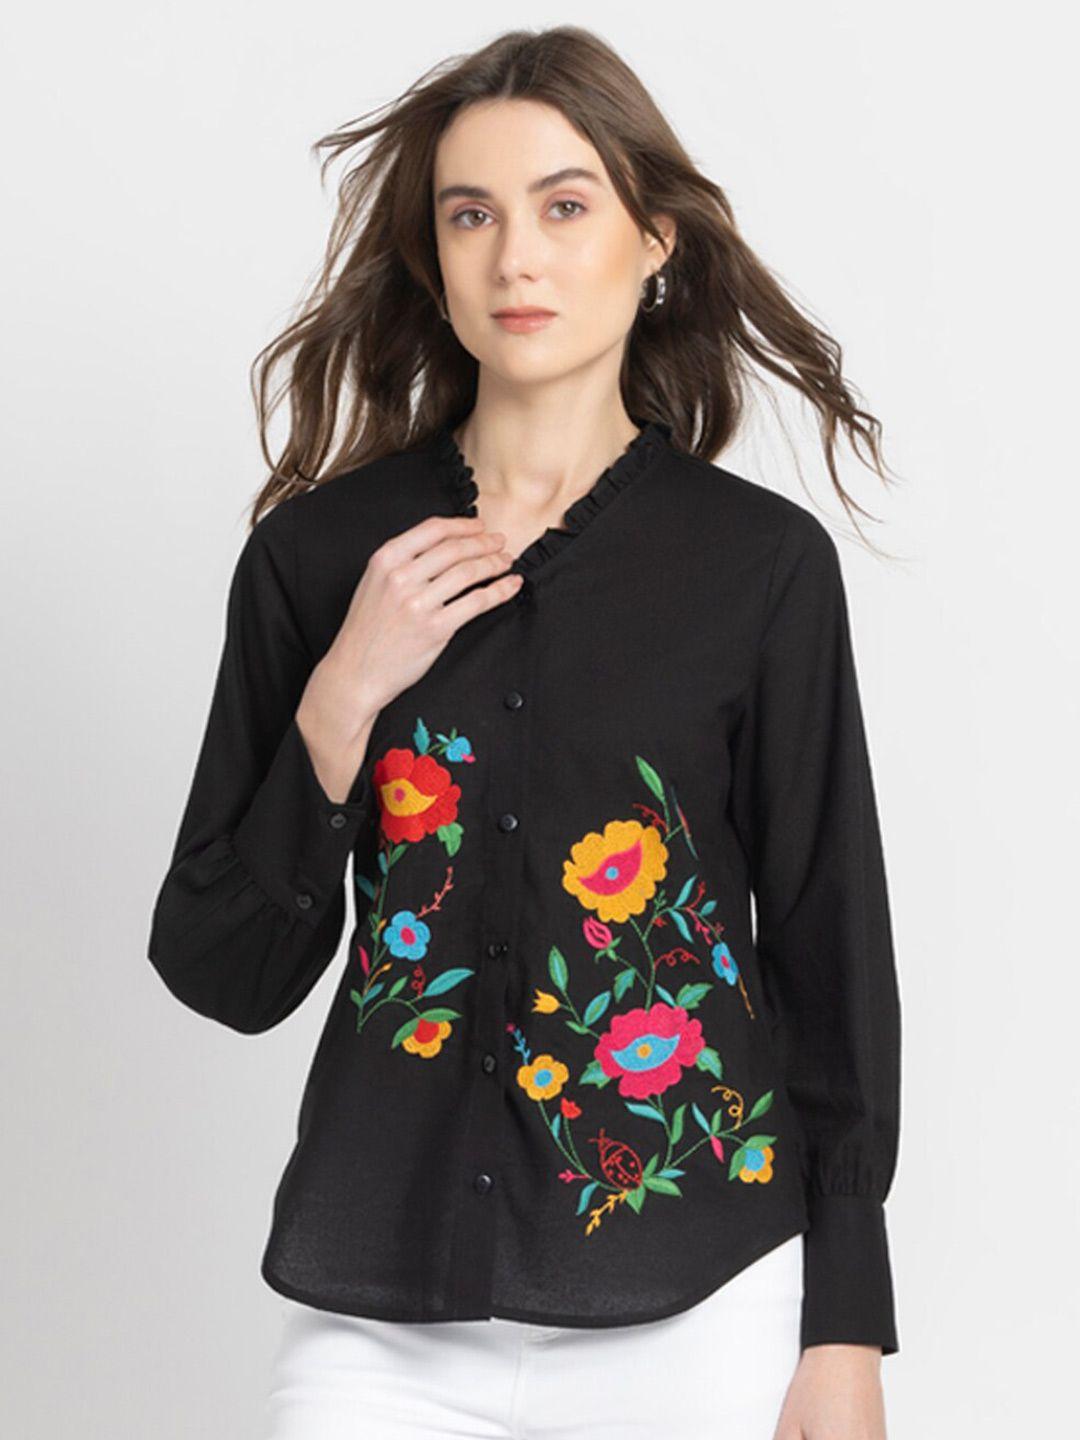 shaye floral embroidered cuffed sleeves cotton shirt style top